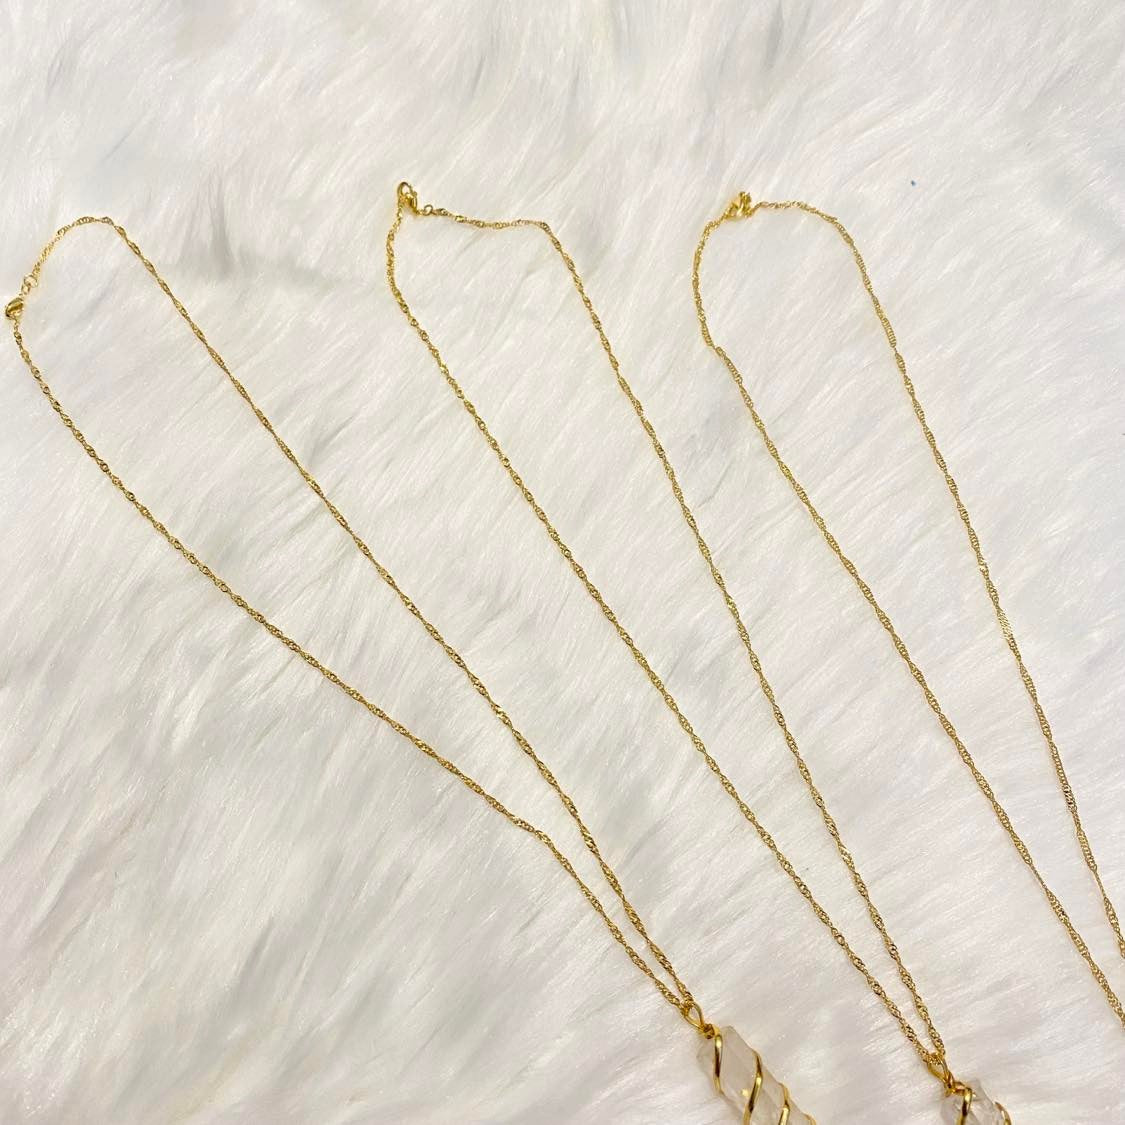 Clear Quartz Necklace with Gold Dipped Chain